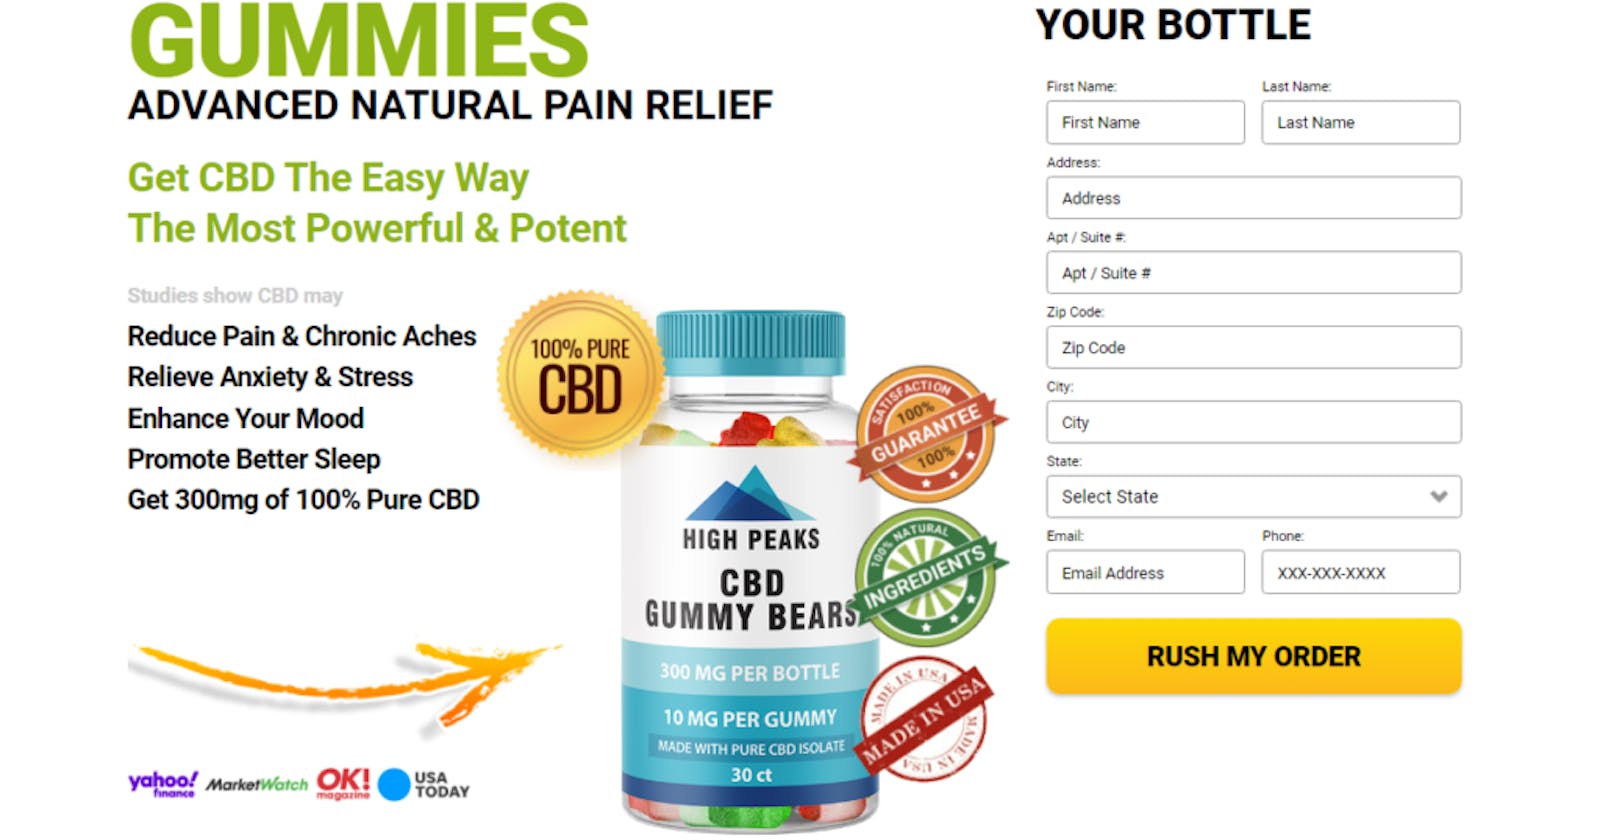 High Peaks CBD Gummies - Dangers Or Is It Legit (Shocking User Complaints) What To Know Before Buying These Pills